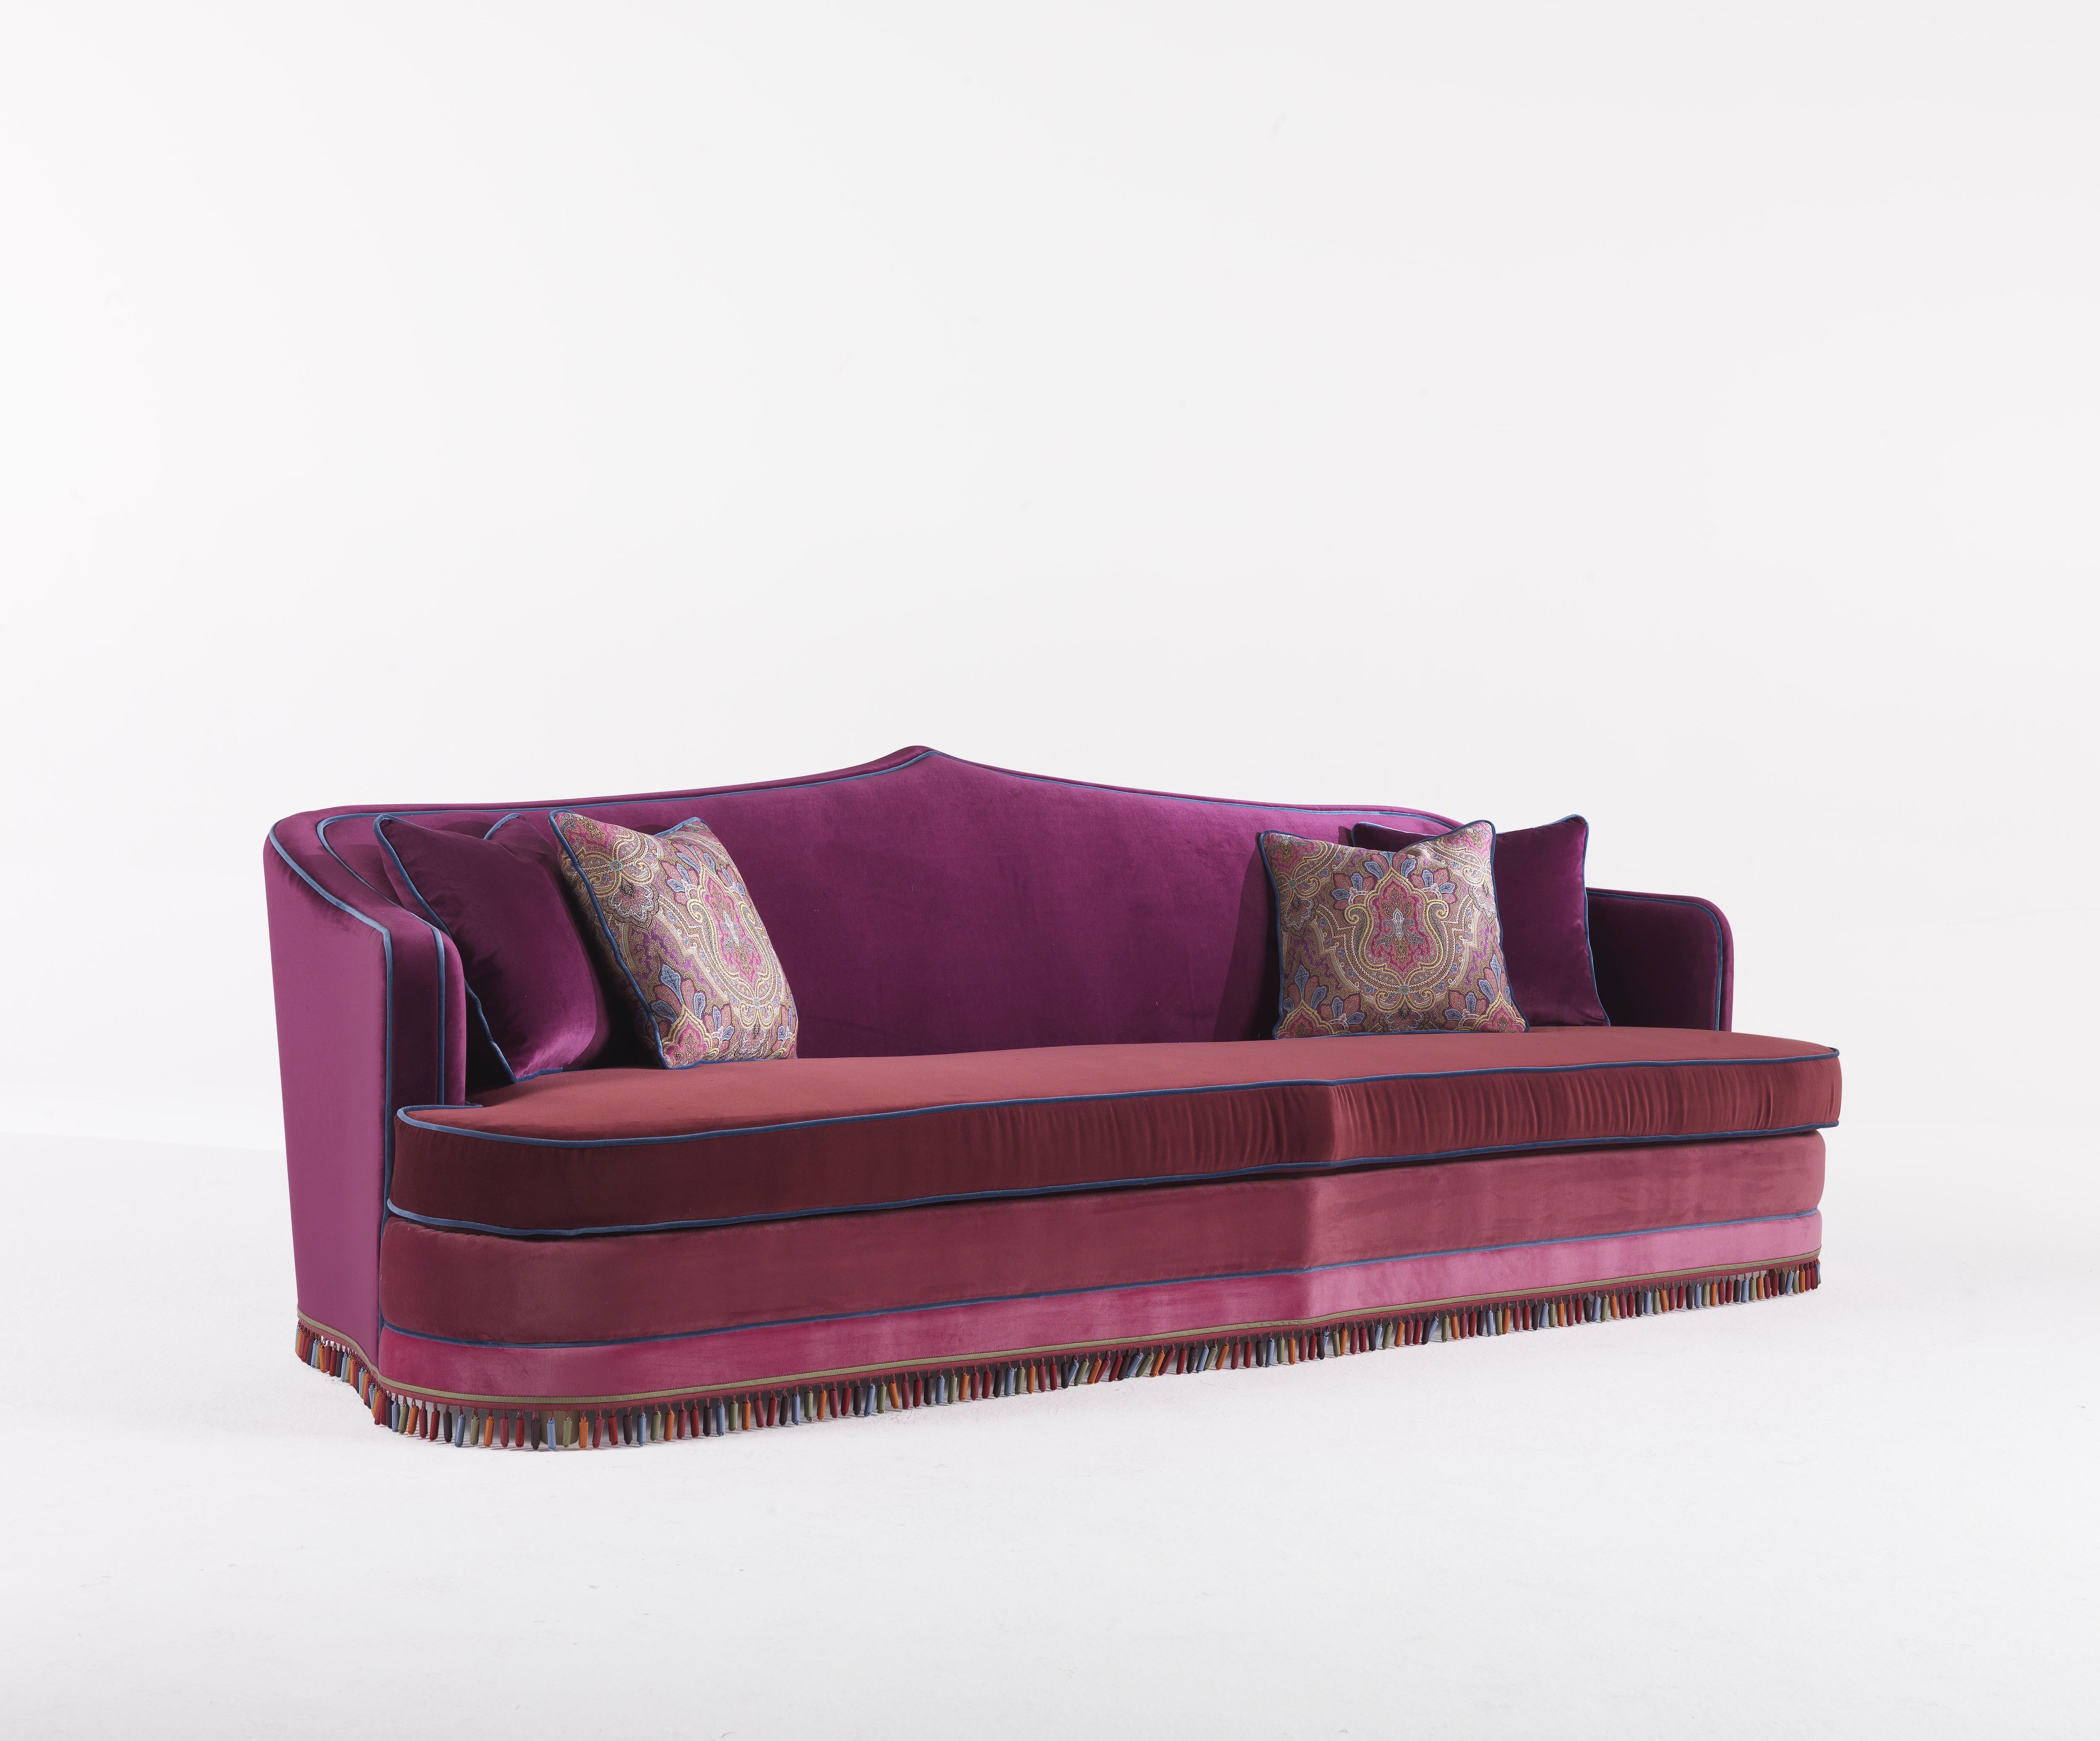 An attractive and comfortable sofa inspired by a ‘thousand-and-one-nights’ imagery. The combination of different fabrics and the original, multicolored trimming contribute to creating an original sofa, in perfect ETRO Home Interiors style.

AMINA